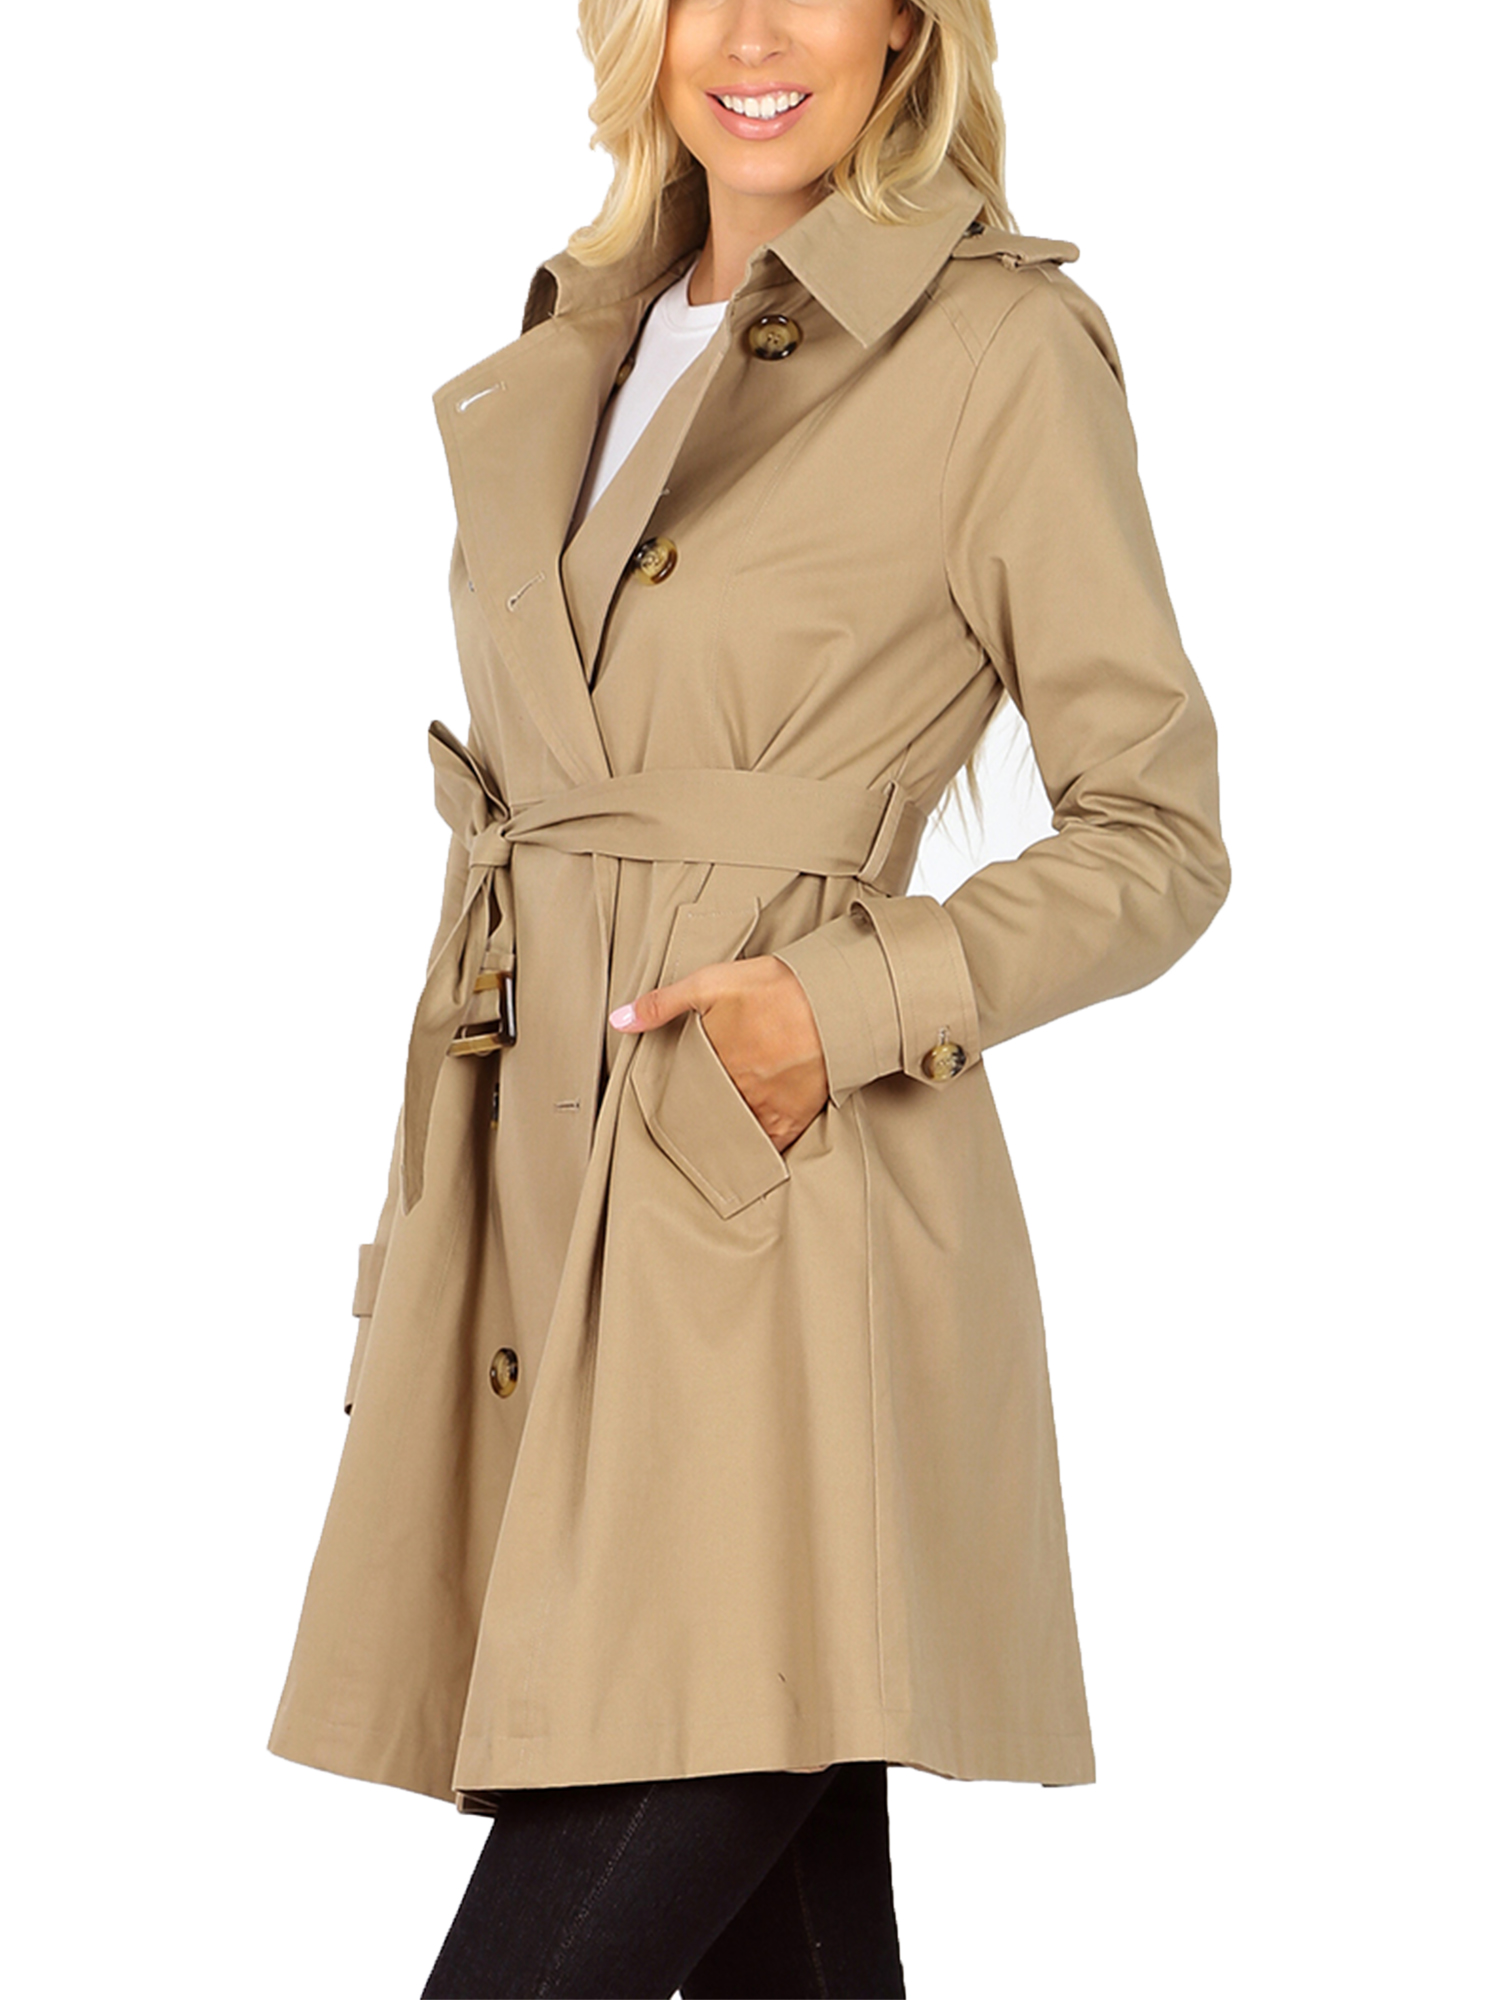 KOGMO Womens Double Breasted Trench Coat Jacket with Waist Belt - image 2 of 5